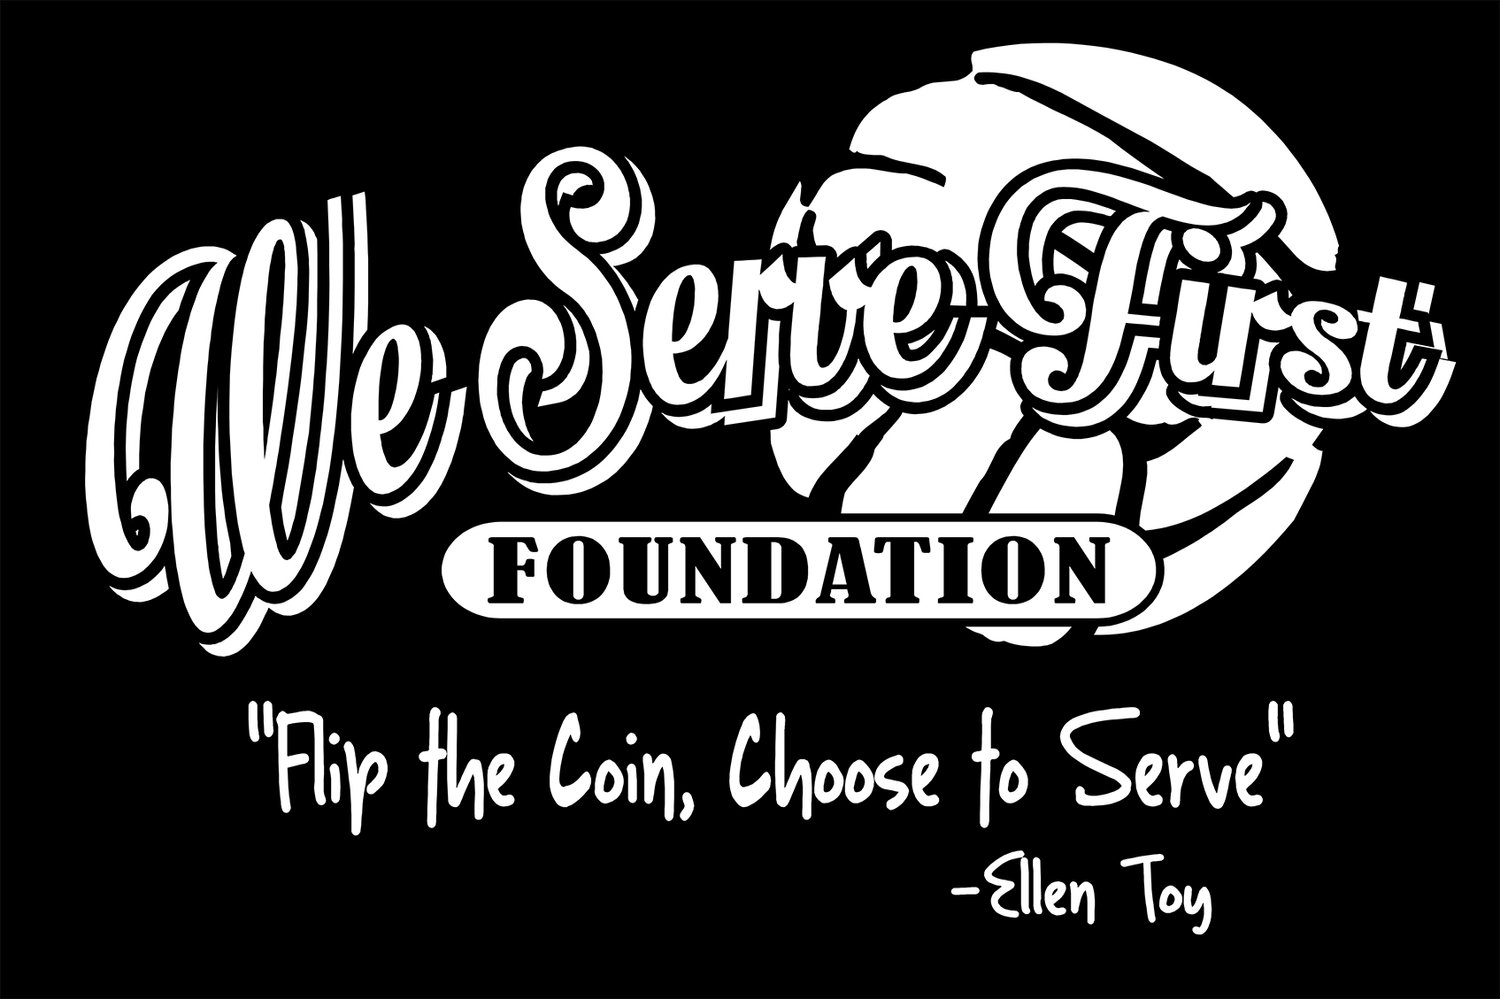 We Serve First, a Volleyball Foundation